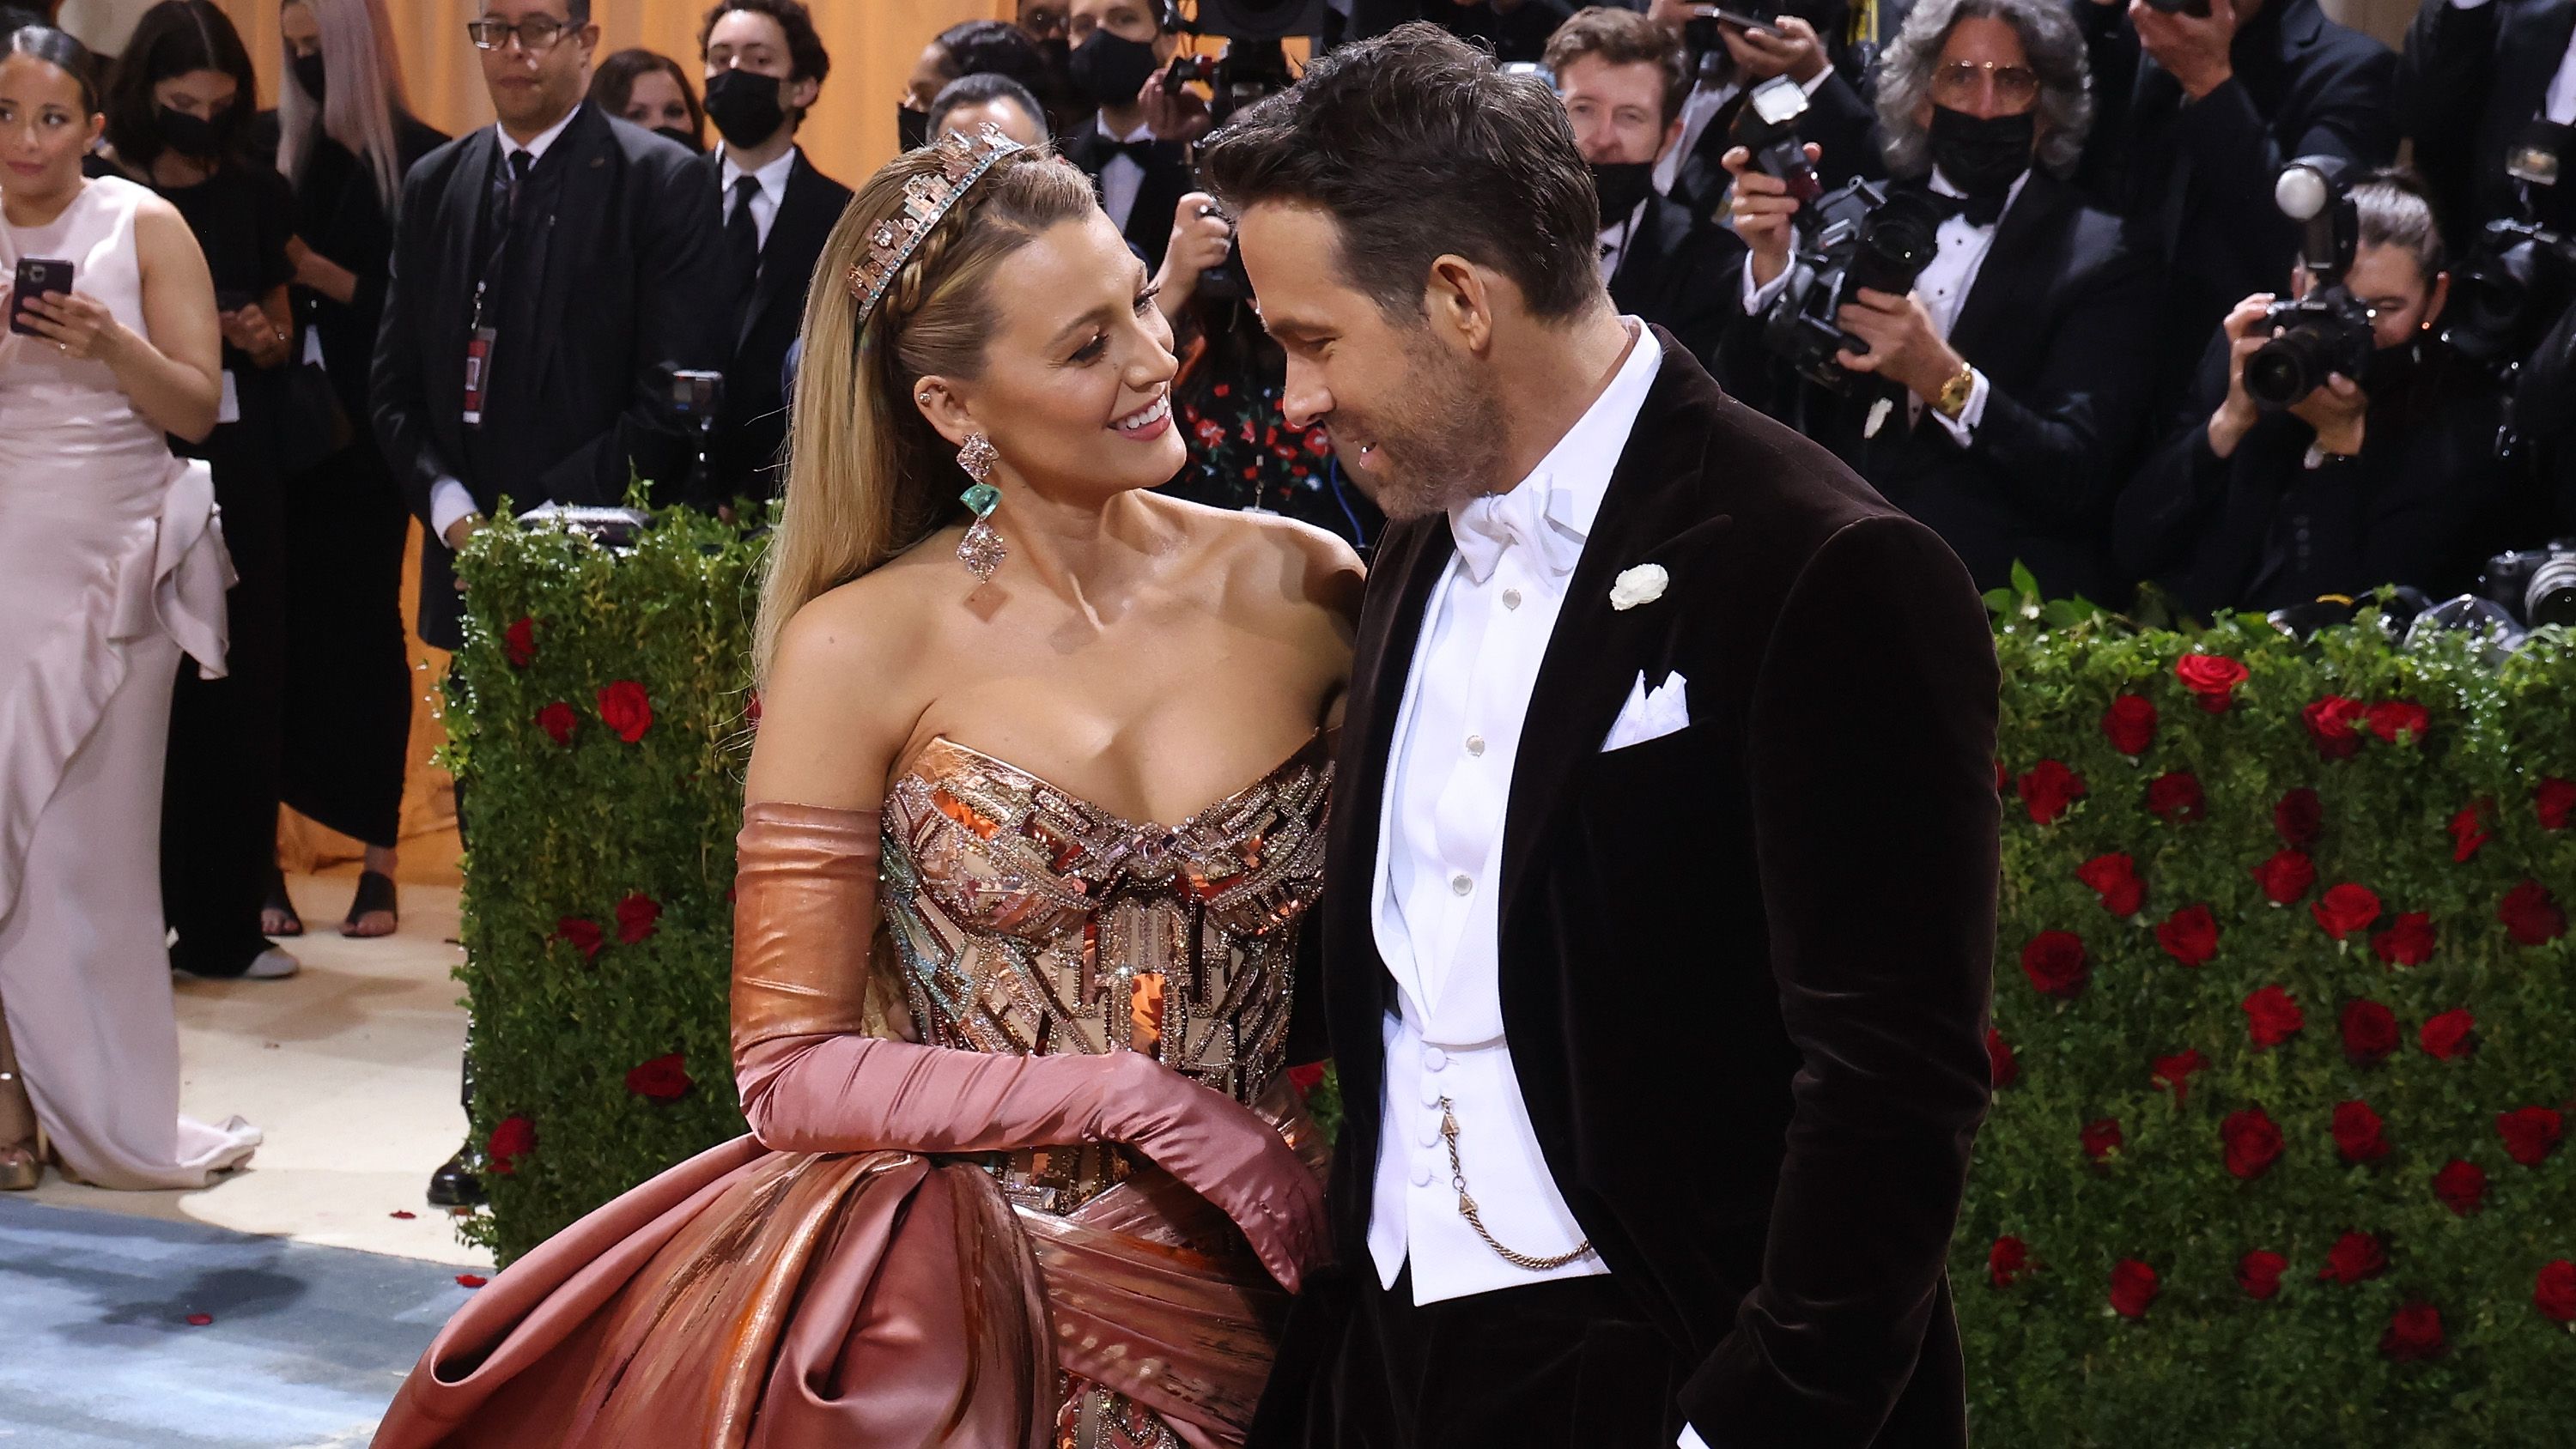 https://hips.hearstapps.com/hmg-prod/images/blake-lively-and-ryan-reynolds-attend-in-america-an-news-photo-1661453096.jpg?crop=1xw:0.84375xh;center,top